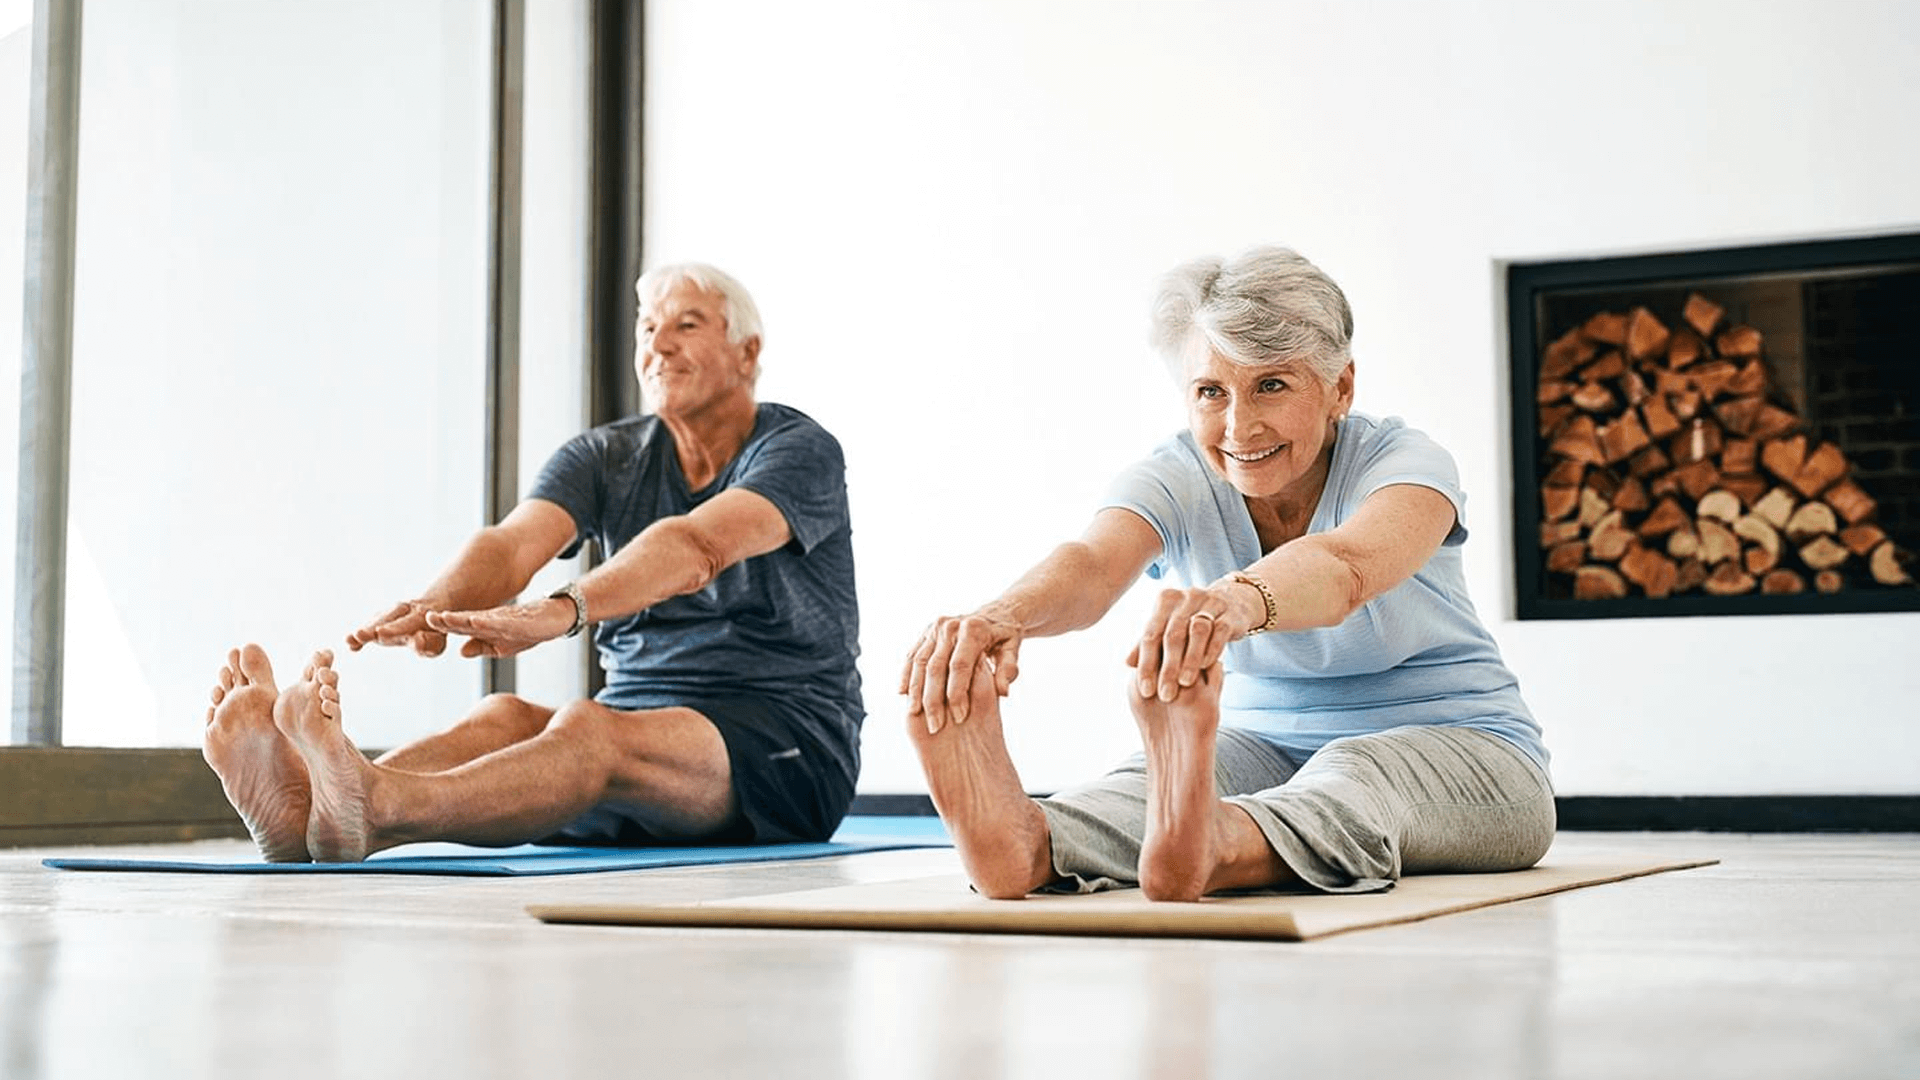 Activities to Look for in a Red Deer Senior-Living Community